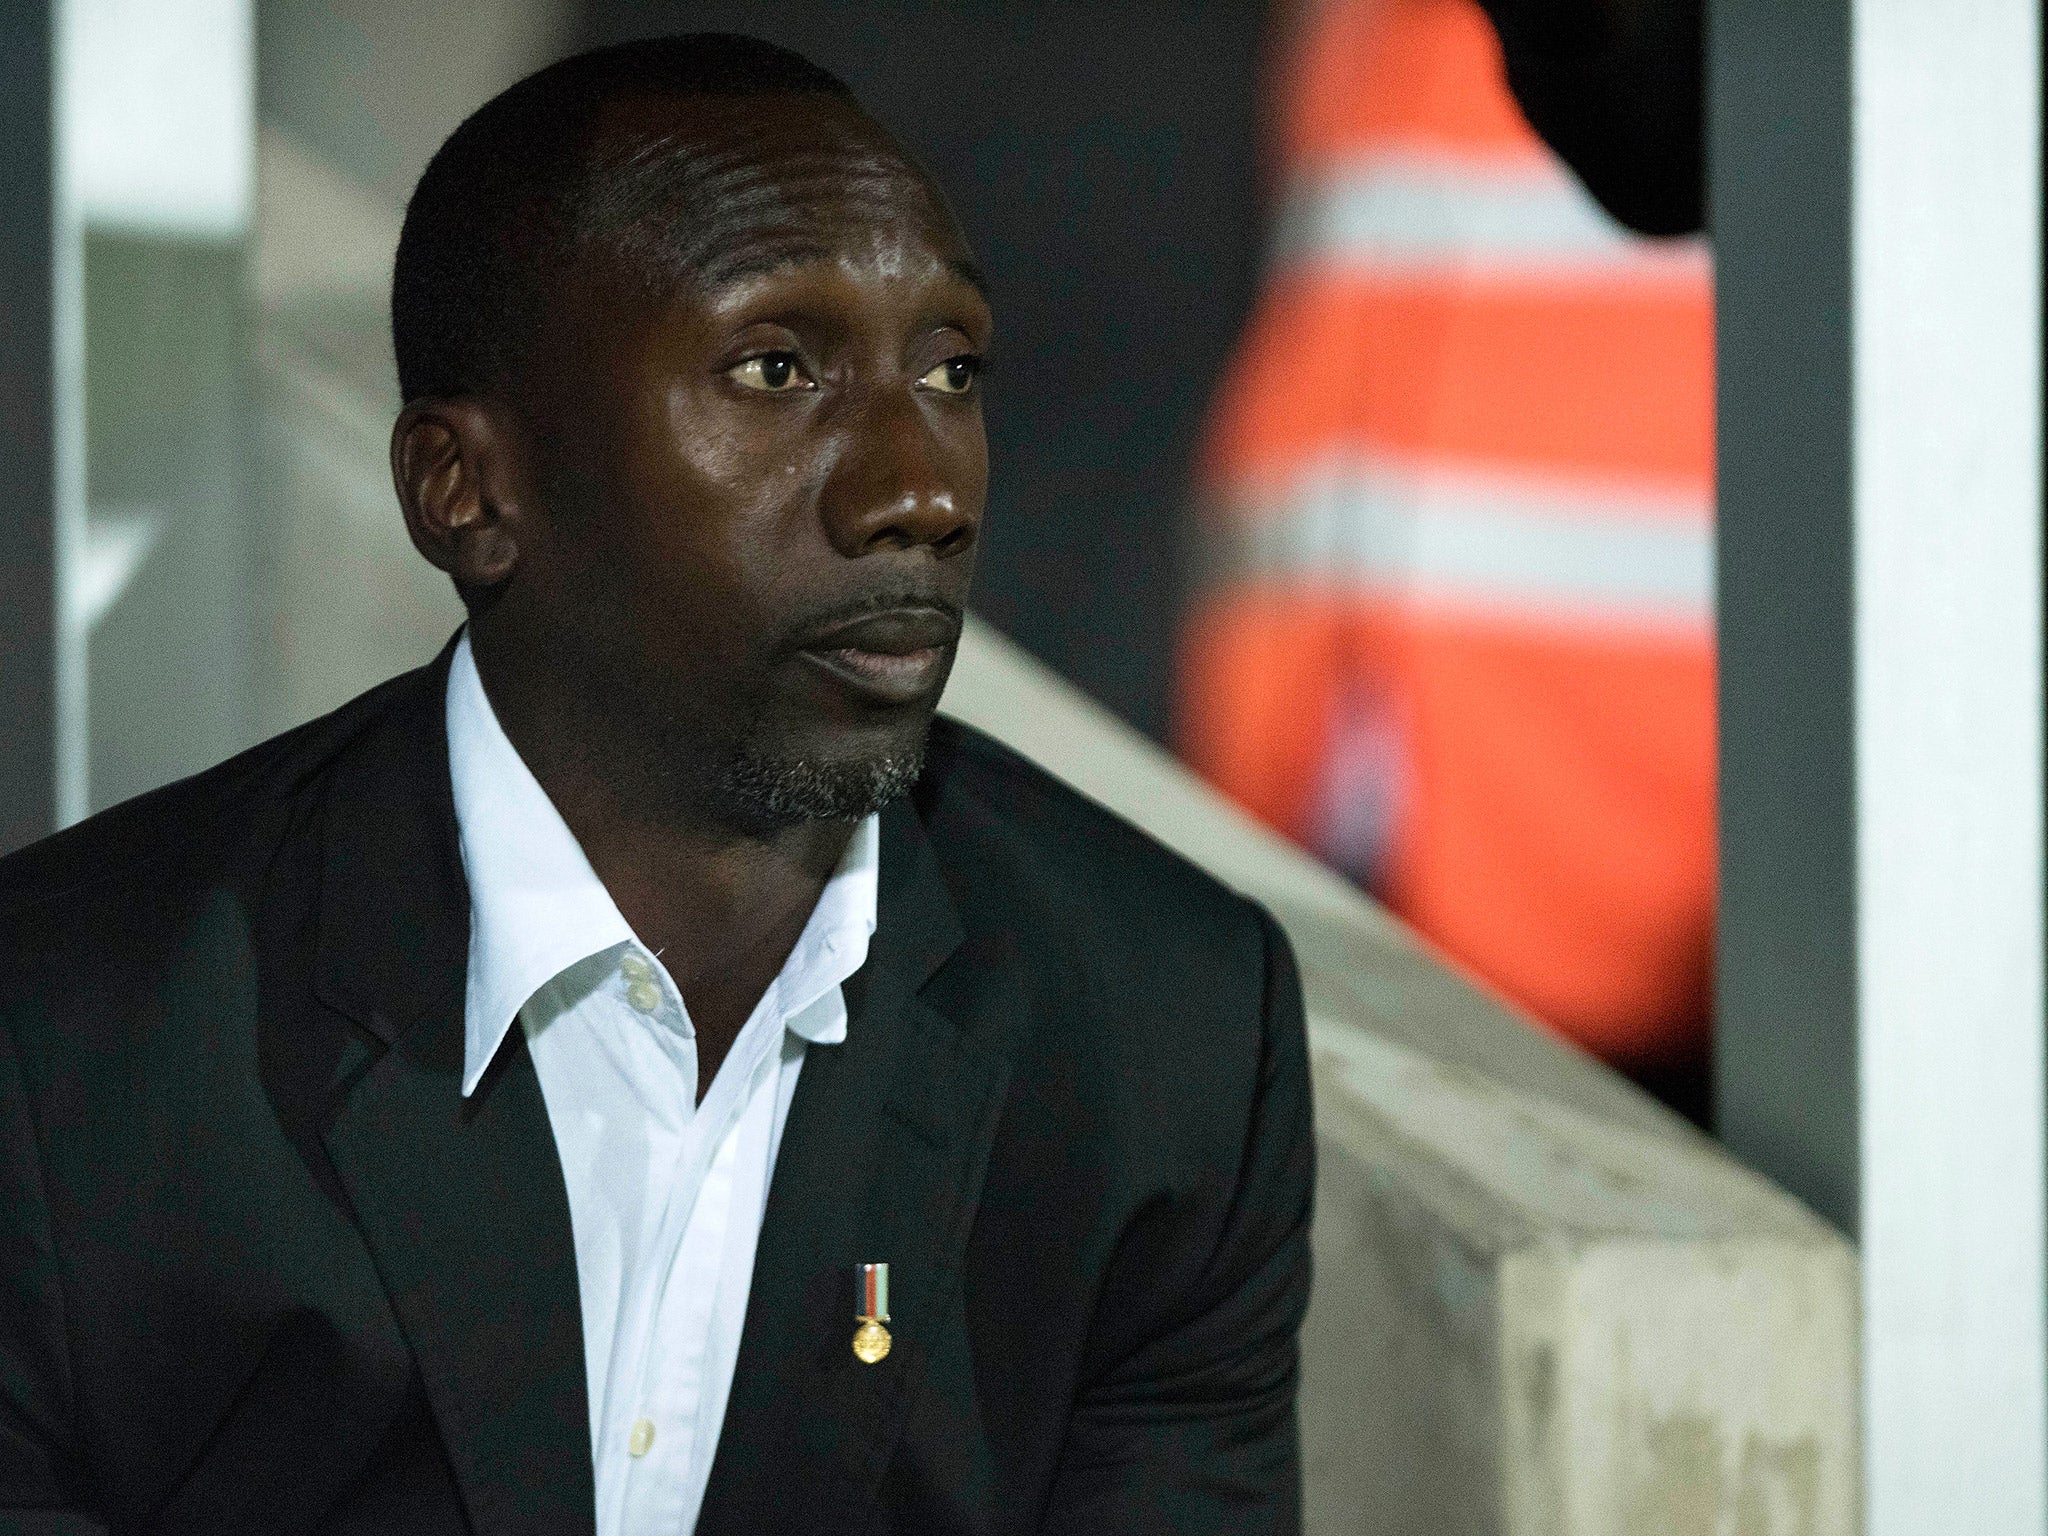 Jimmy-Floyd Hasselbaink has denied all allegations of wrongdoing